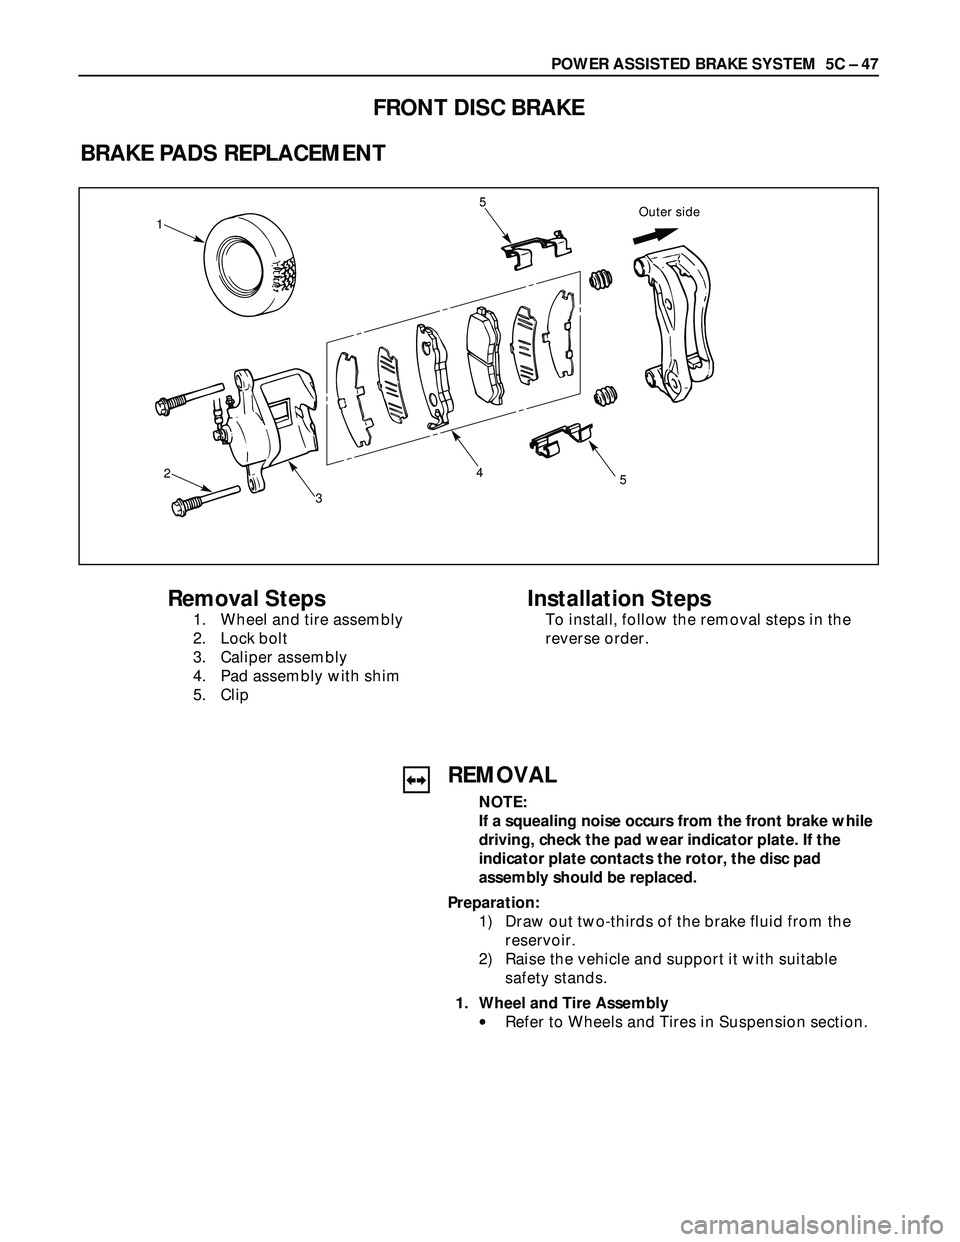 ISUZU TROOPER 1998  Service Service Manual POWER ASSISTED BRAKE SYSTEM  5C – 47
FRONT DISC BRAKE
BRAKE PADS REPLACEMENT
Outer side1
2
3
45
5
Removal Steps
1. Wheel and tire assembly
2. Lock bolt
3. Caliper assembly
4. Pad assembly with shim
